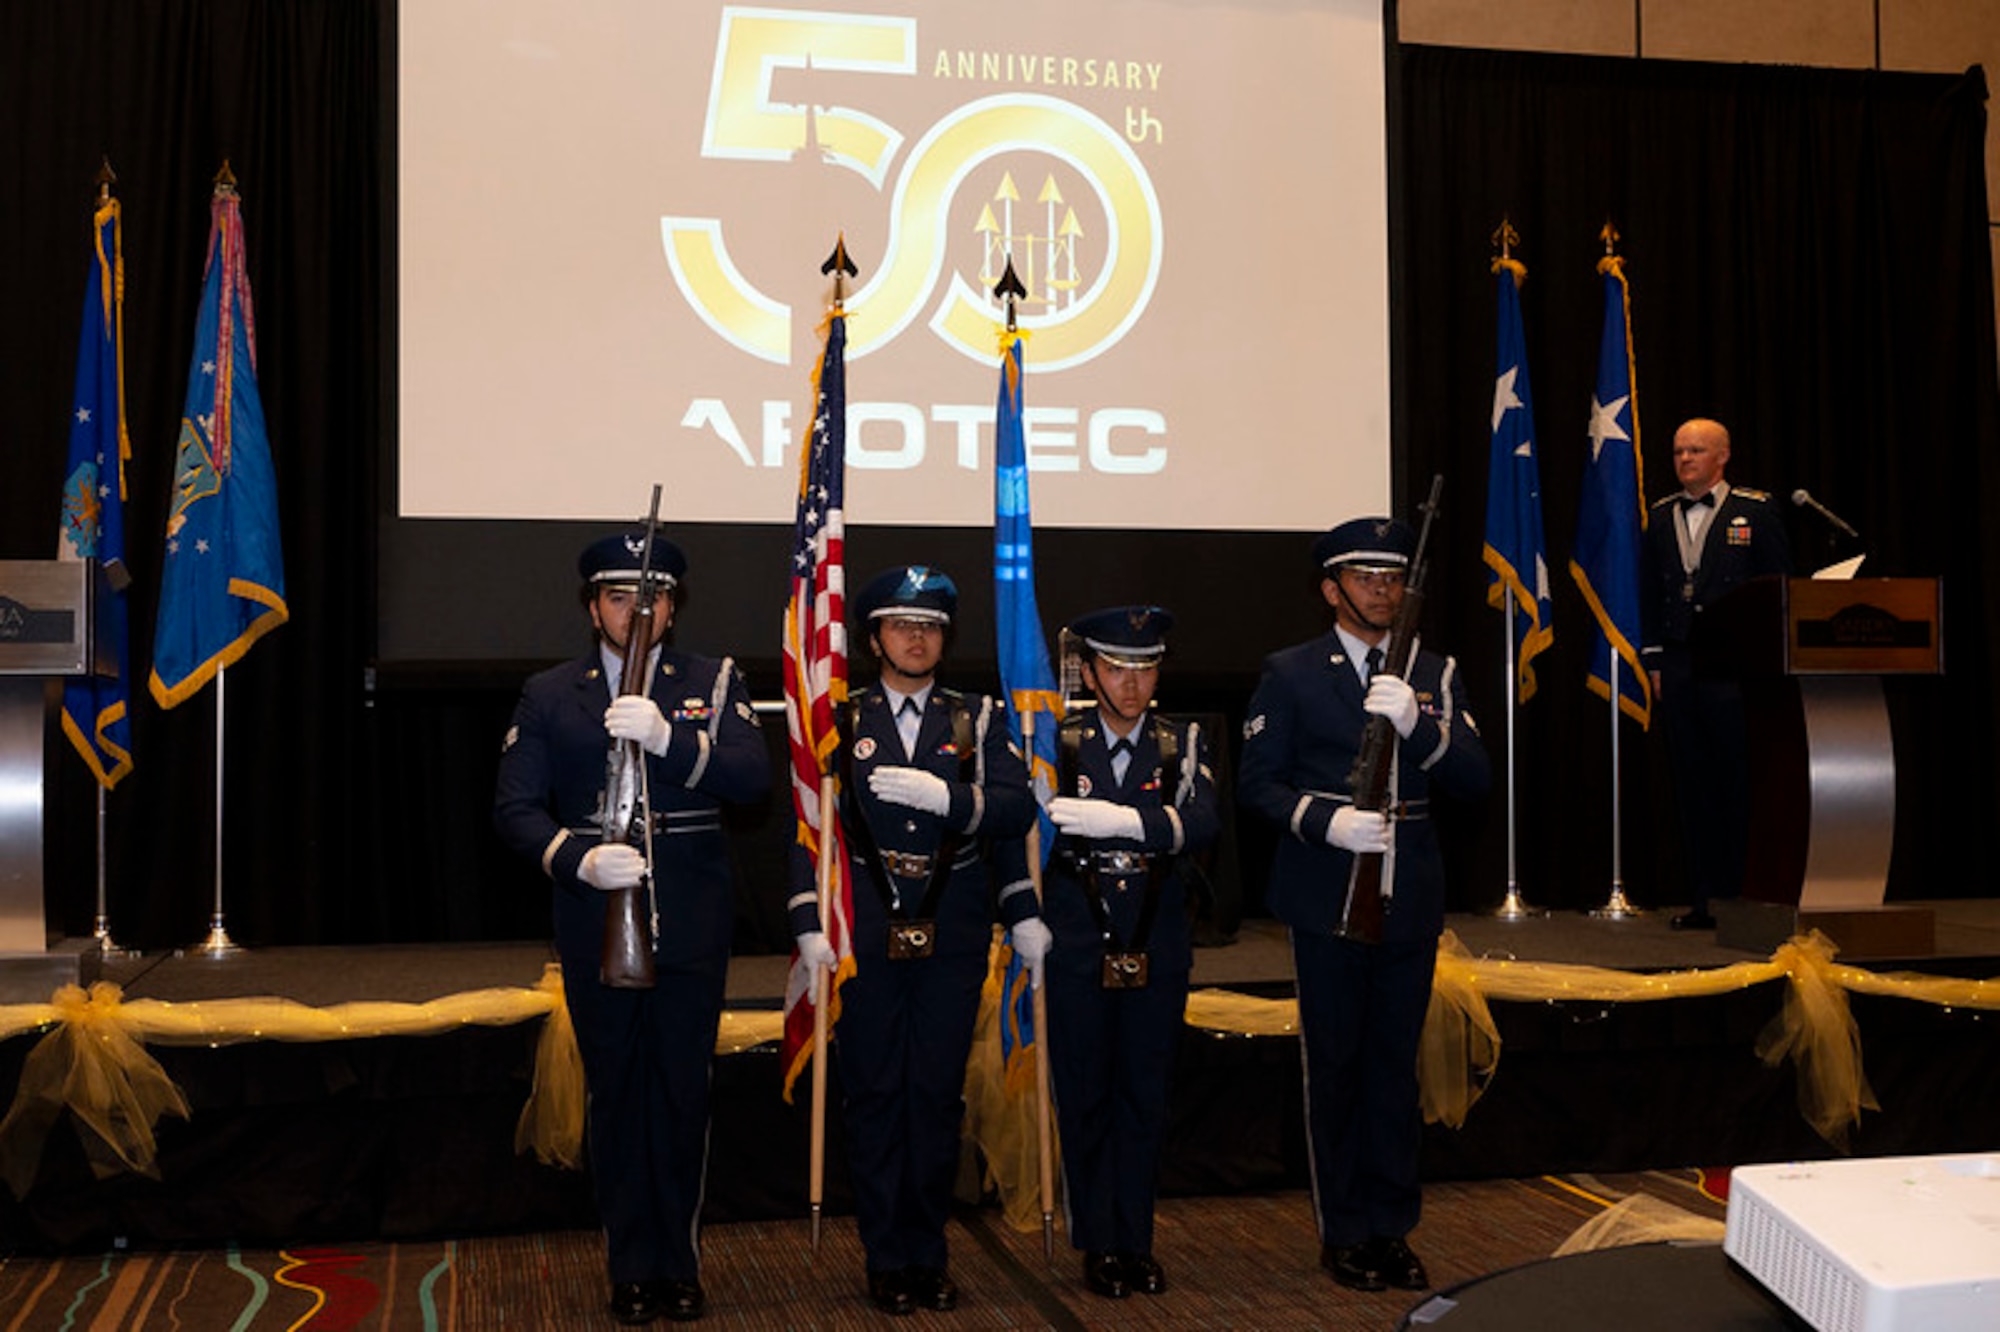 The Team Kirtland Honor Guard presents the colors at the AFOTEC 50th Anniversary Celebration held at the Sandia Resort in Albuquerque, N.M., on March 6, 2024.